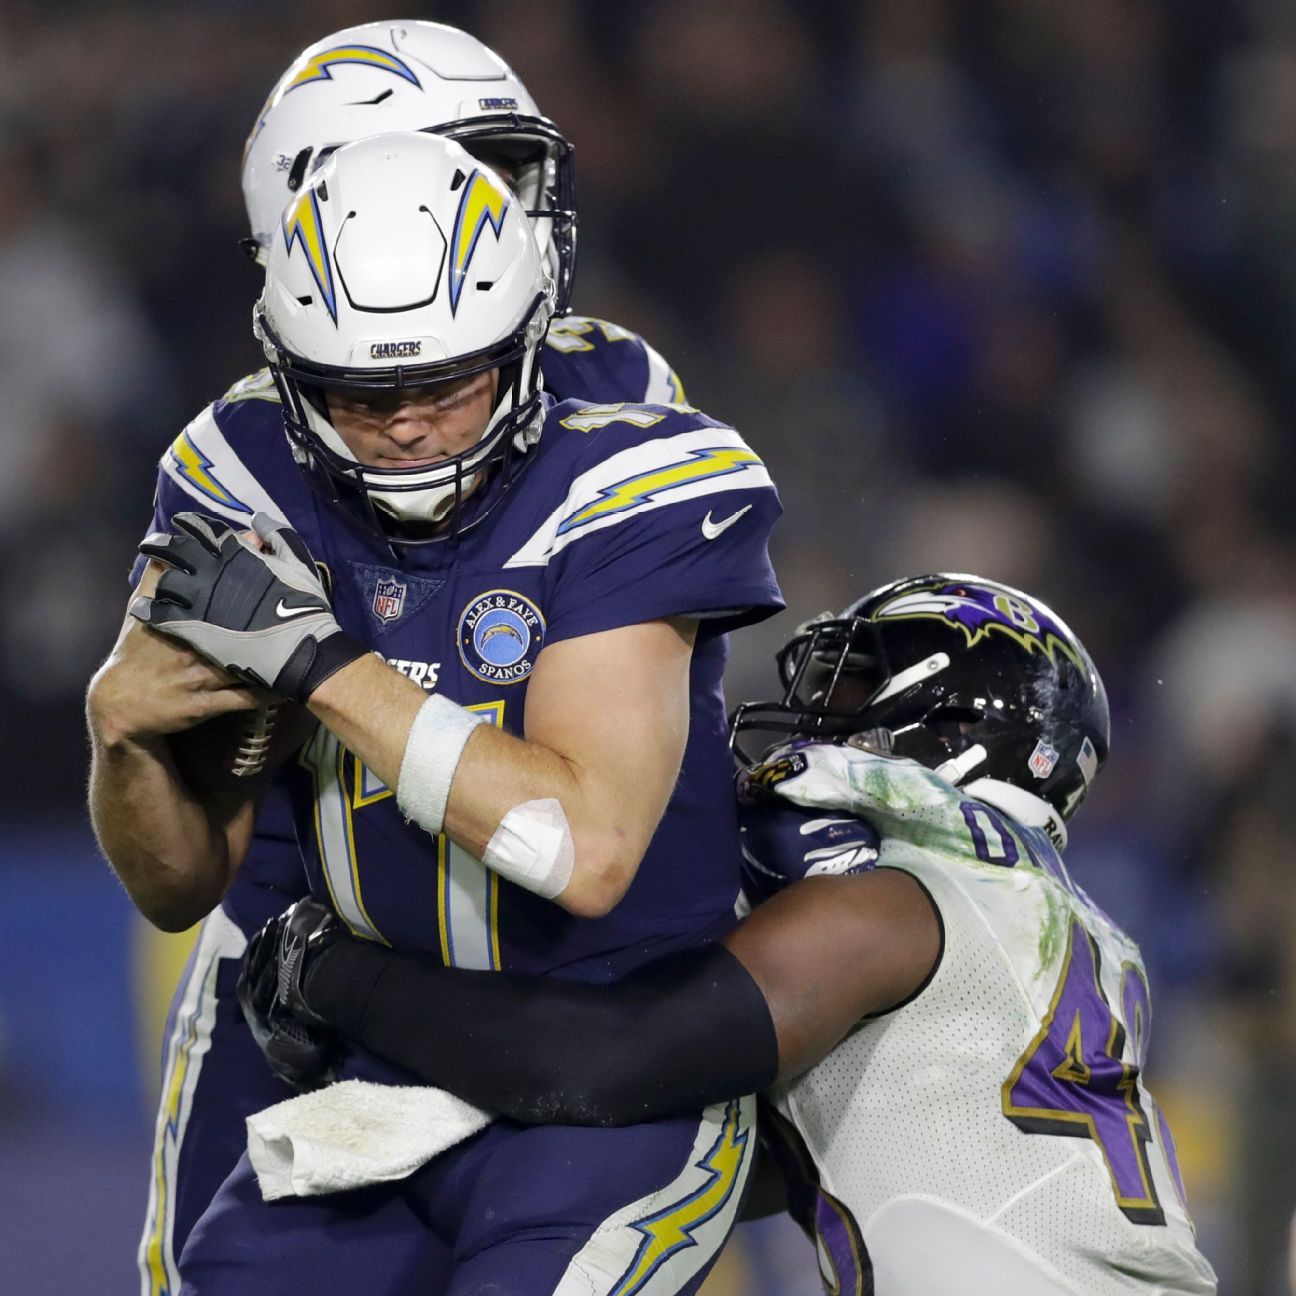 Philip Rivers, QB, Los Angeles Chargers